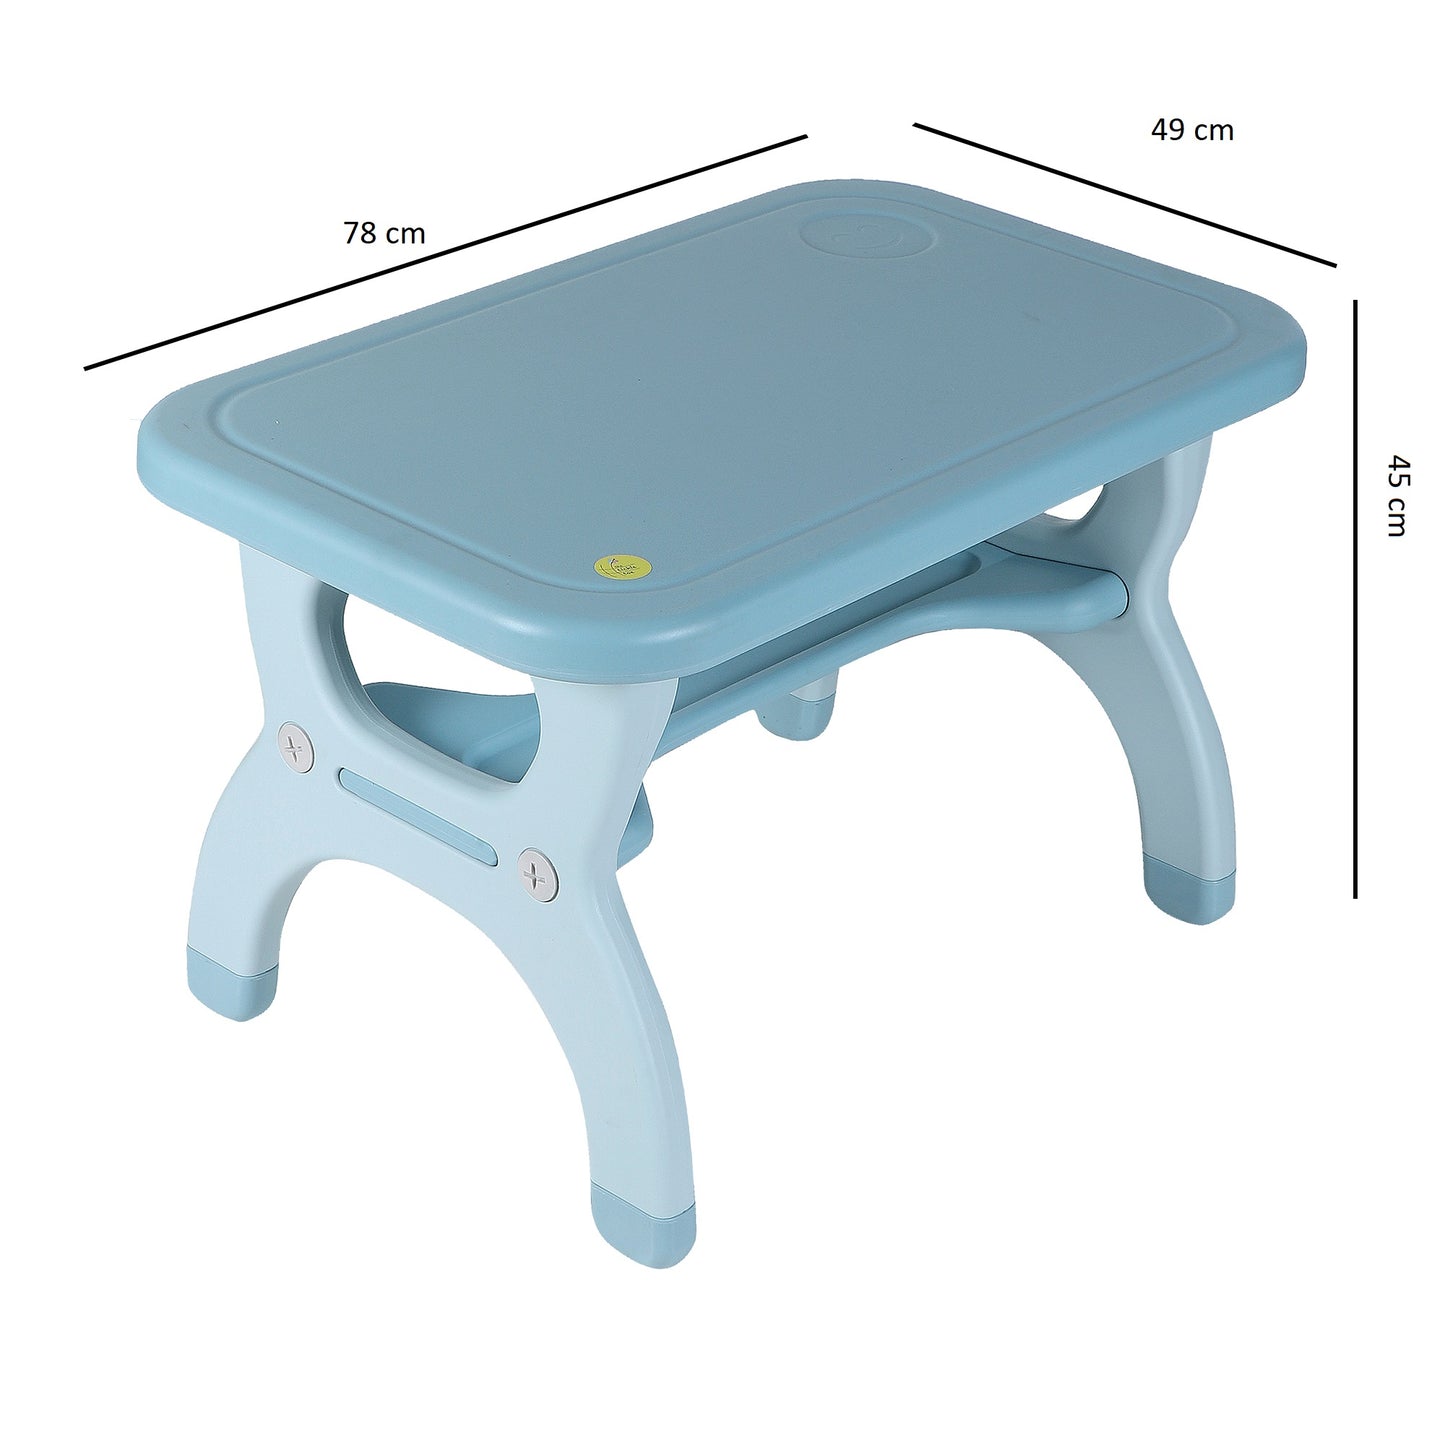 Table Chair with Storage Blue